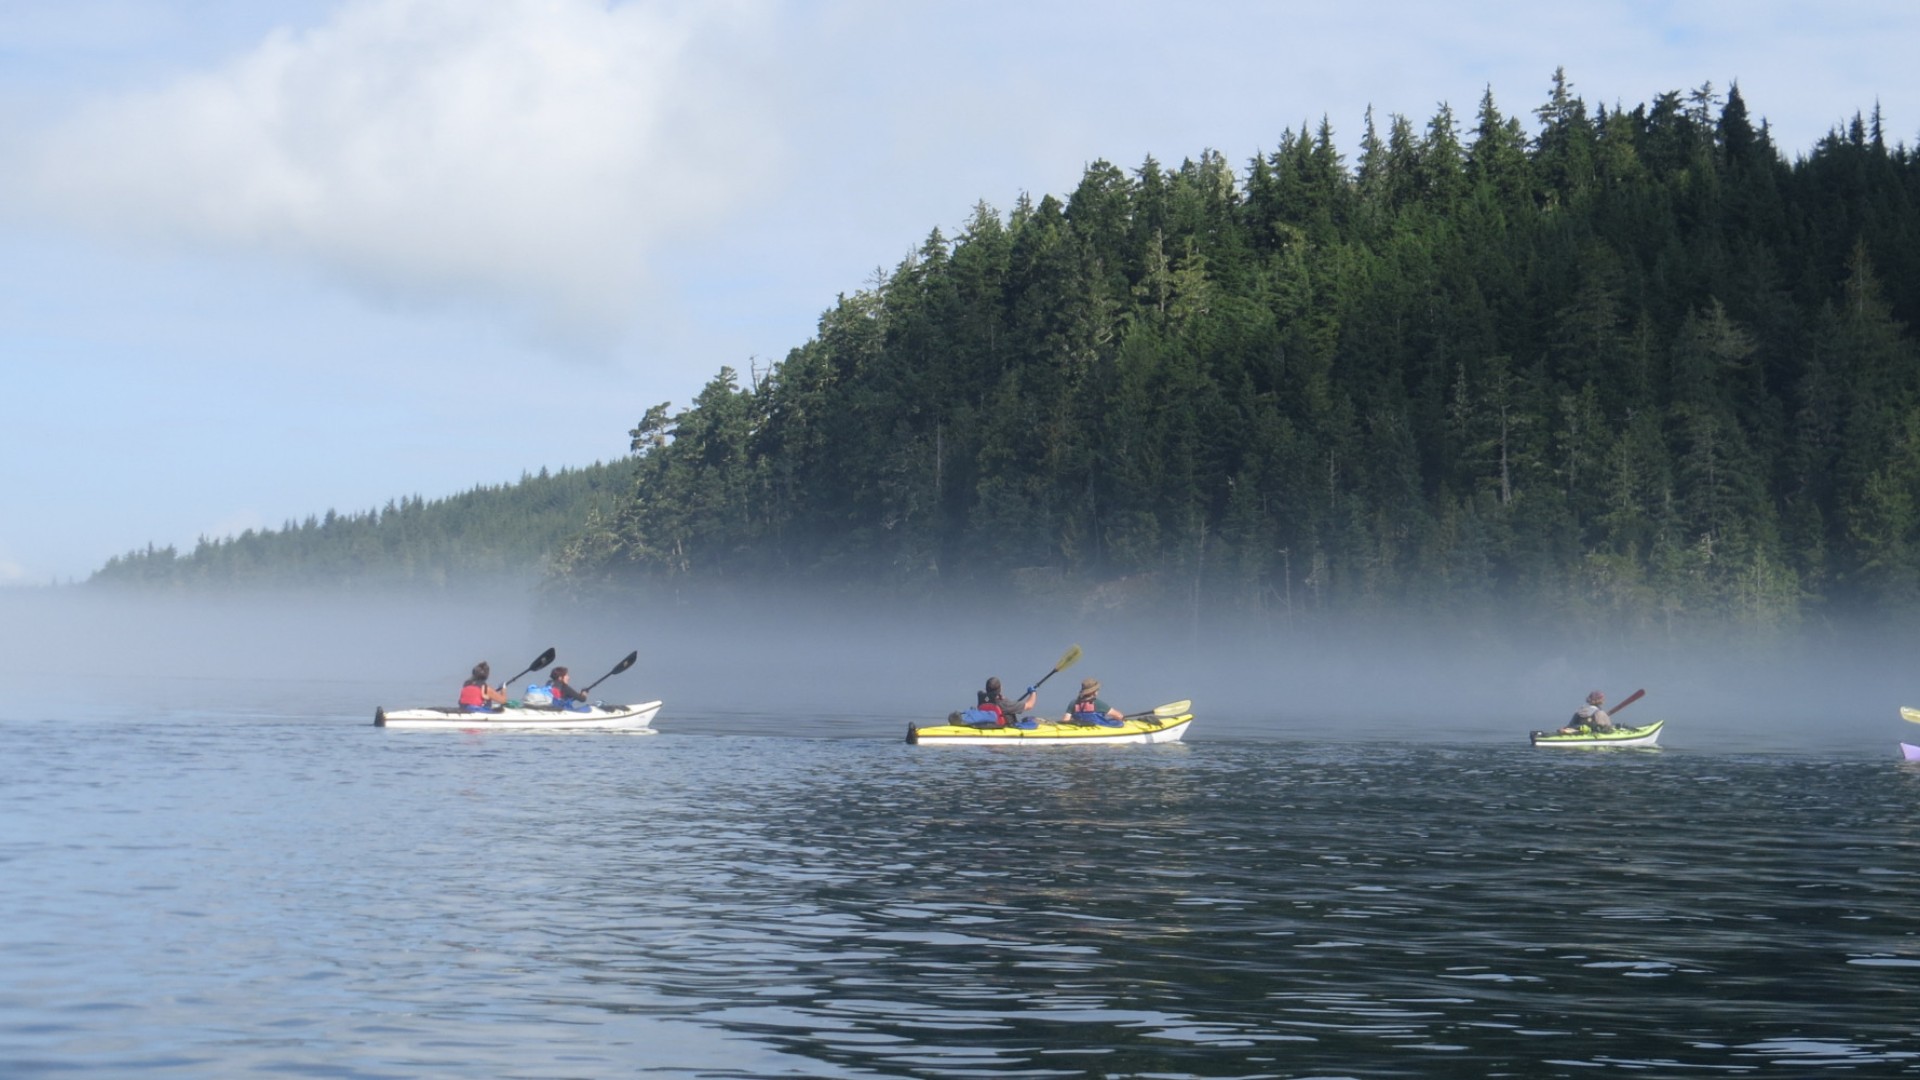 People kayaking on a misty morning off the coast of Vancouver Island